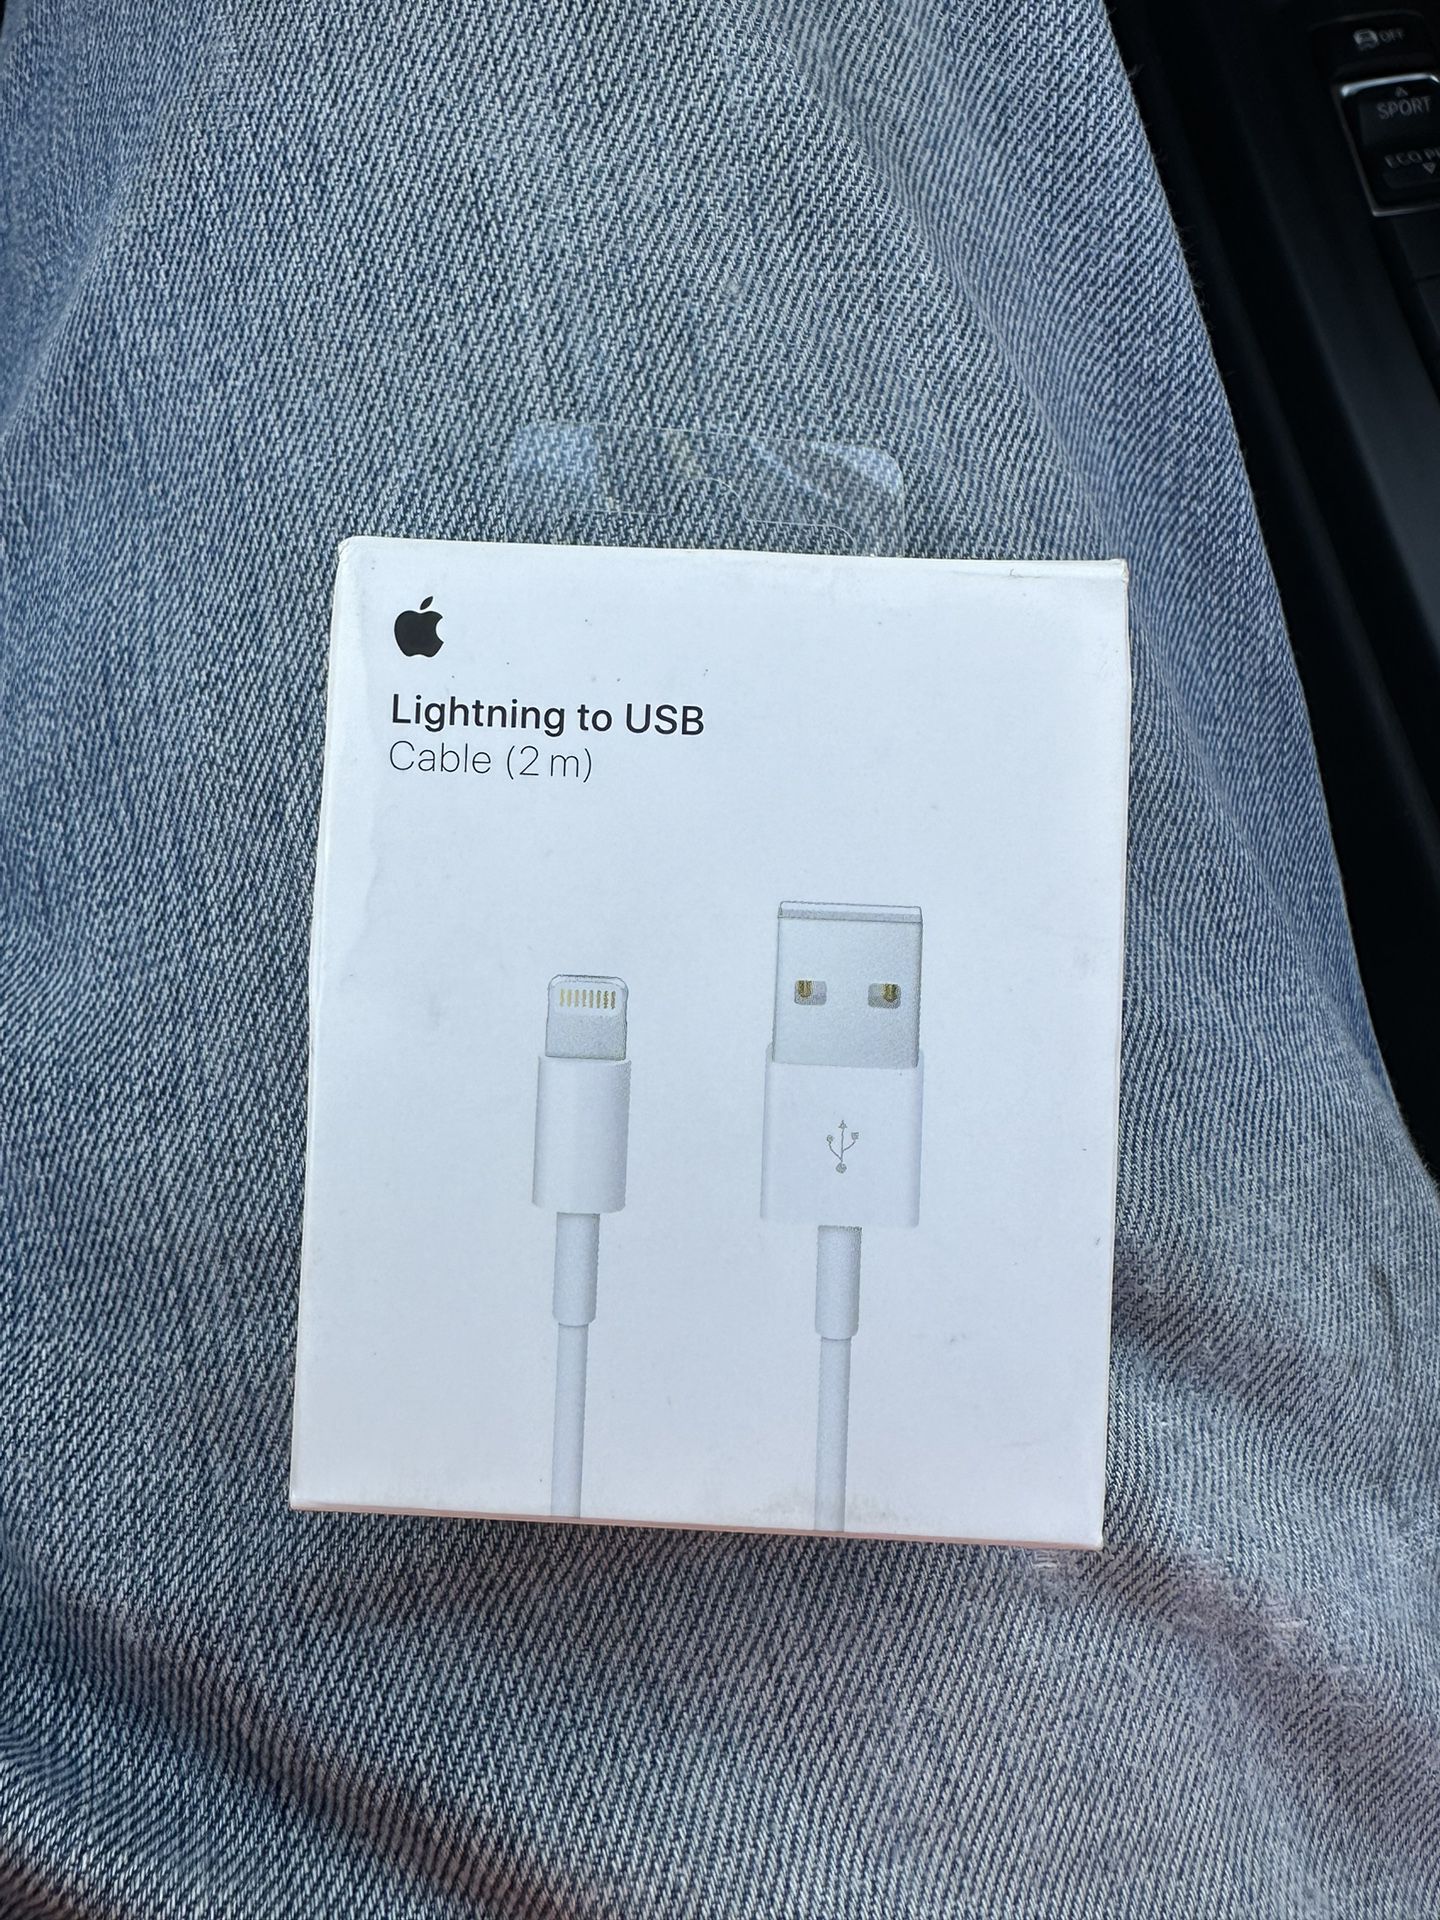 Lightning To USB cable 2m ( 6 feet) Brand New!